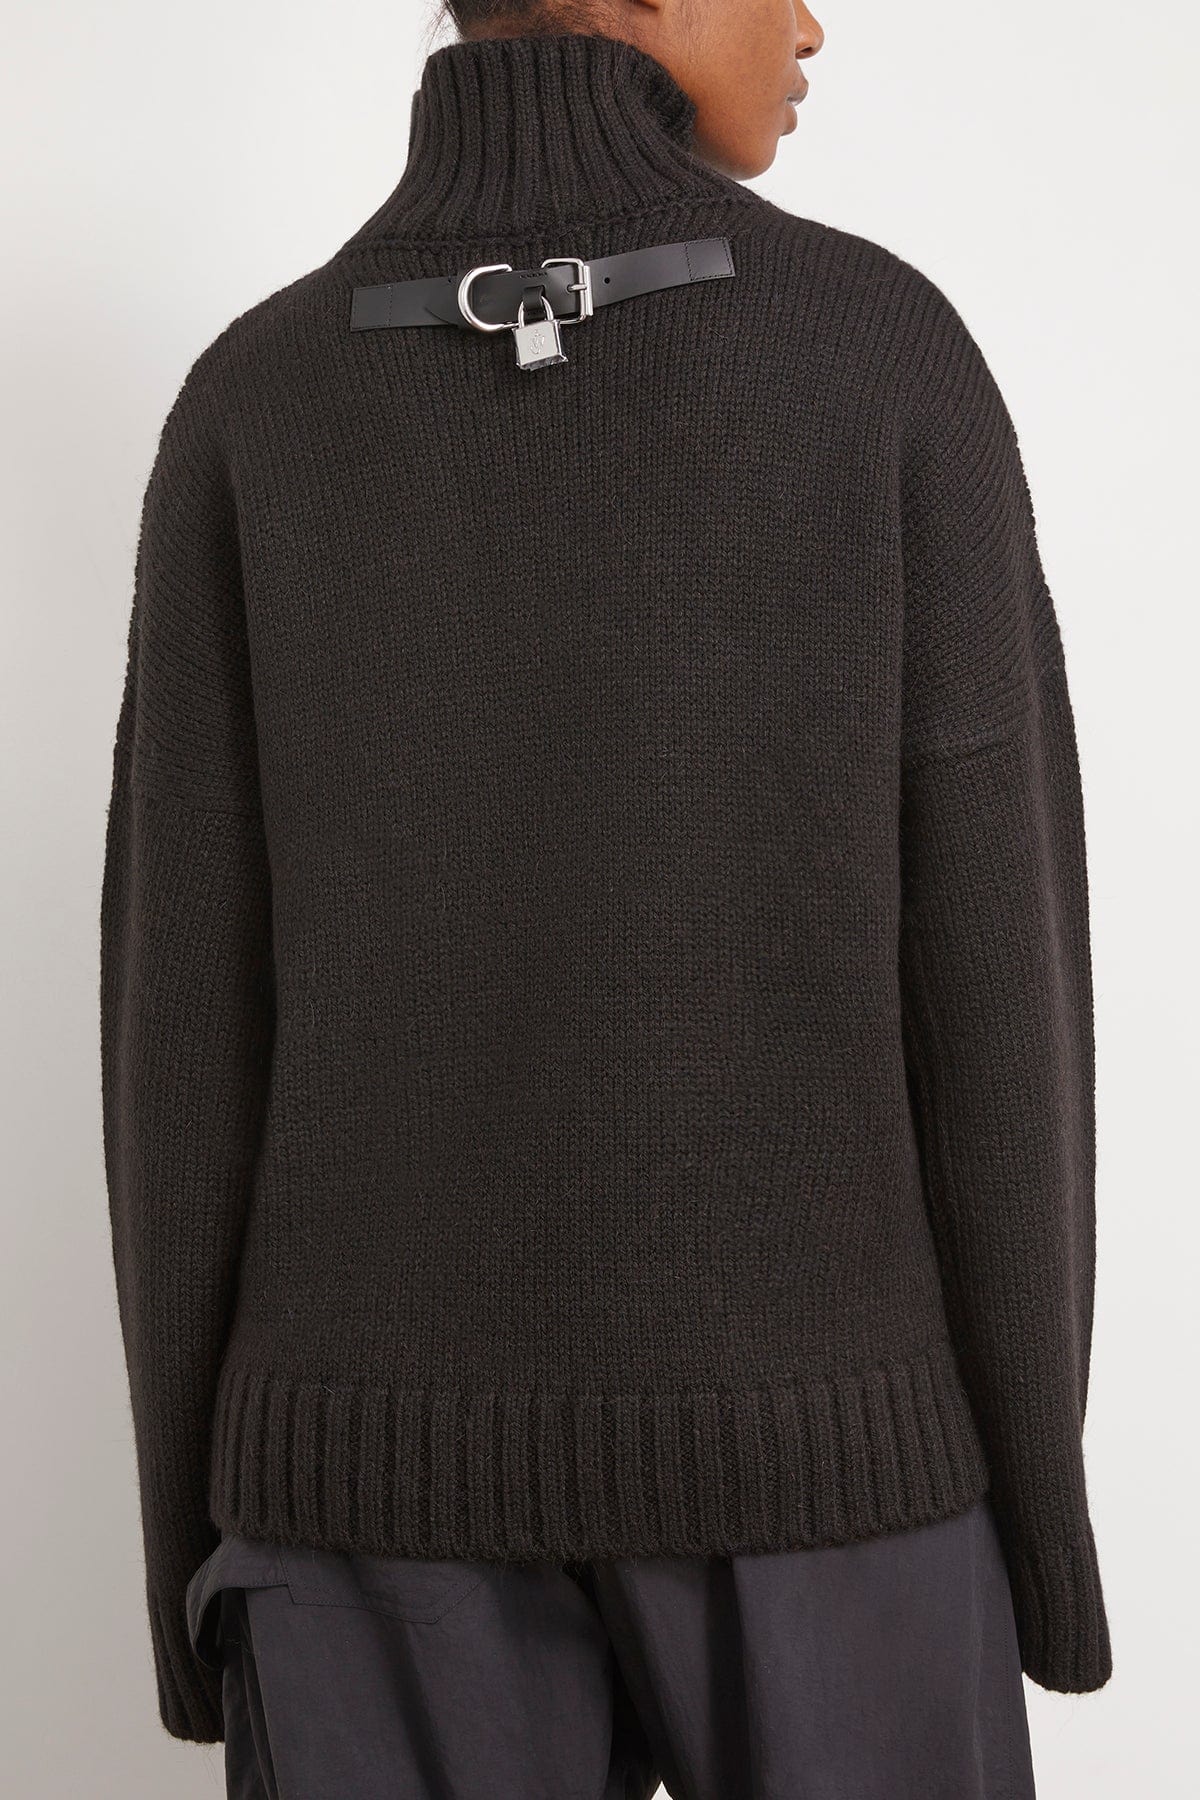 JW Anderson Sweaters Leather Patch Pocket Jumper in Black JW Anderson Leather Patch Pocket Jumper in Black